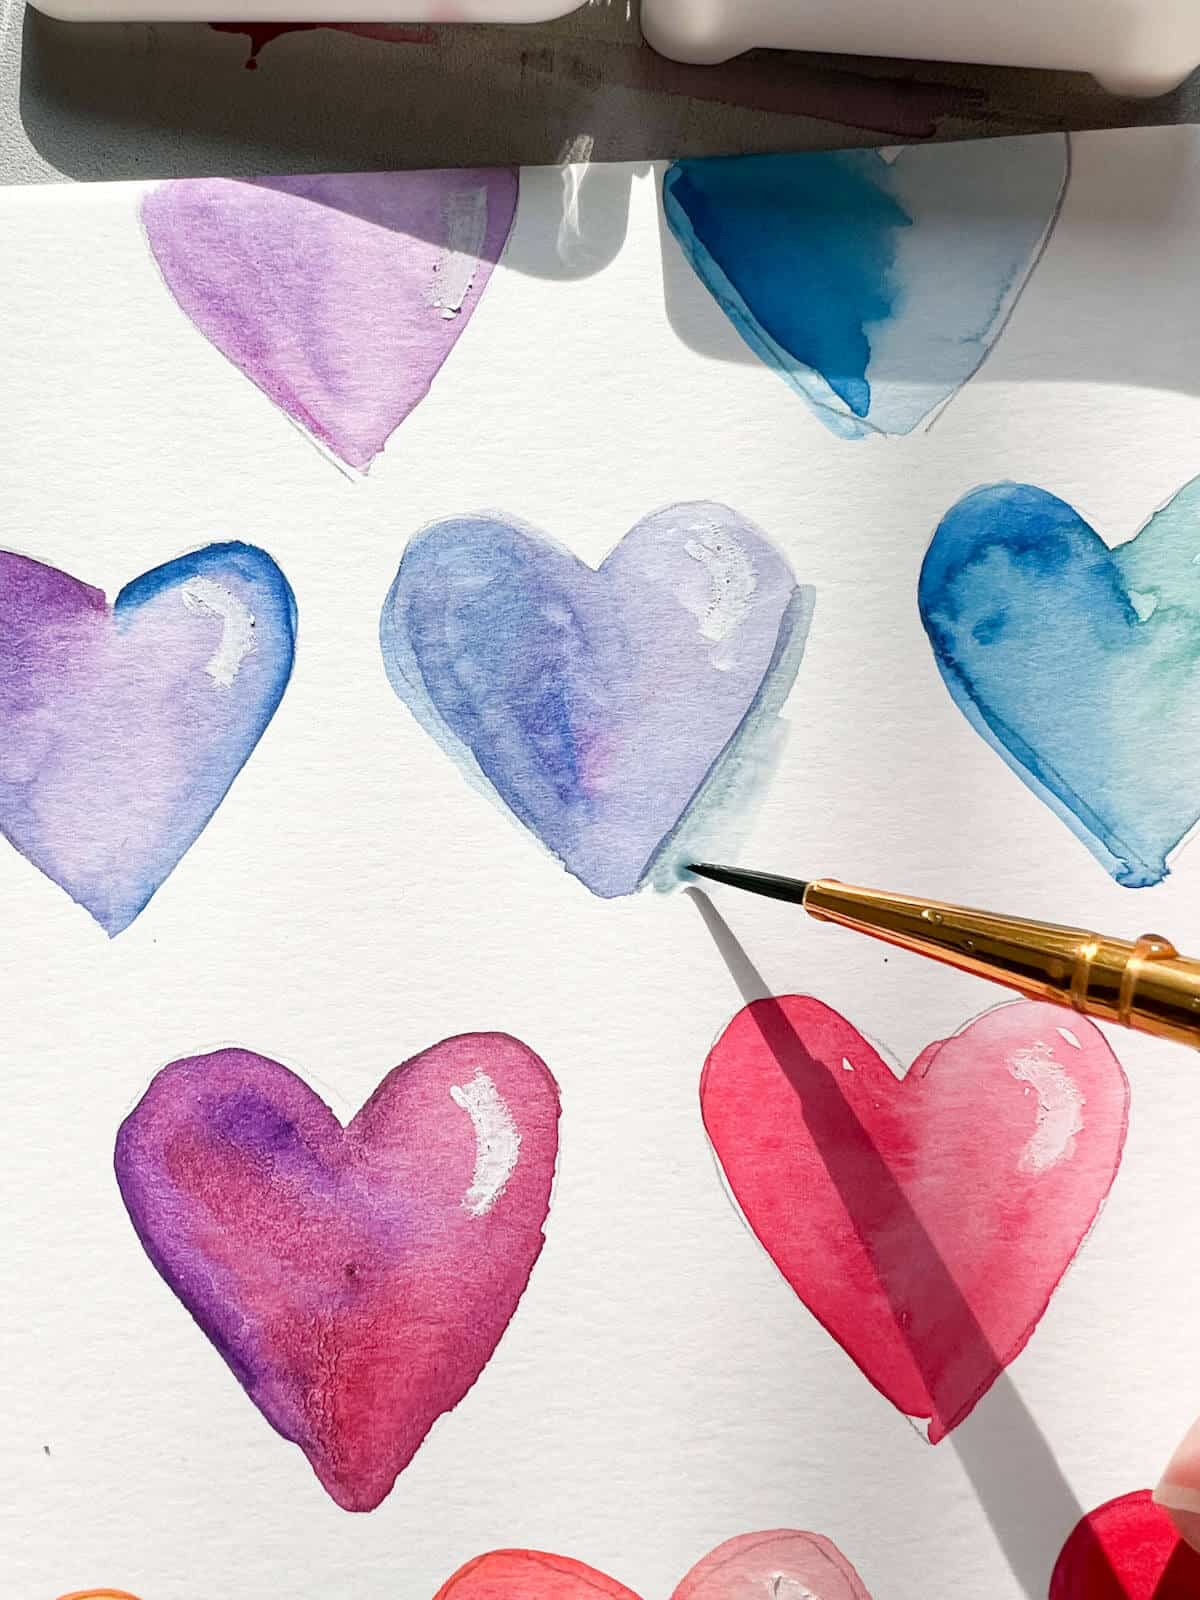 small brush adding gray blue paint to watercolor heart painting.